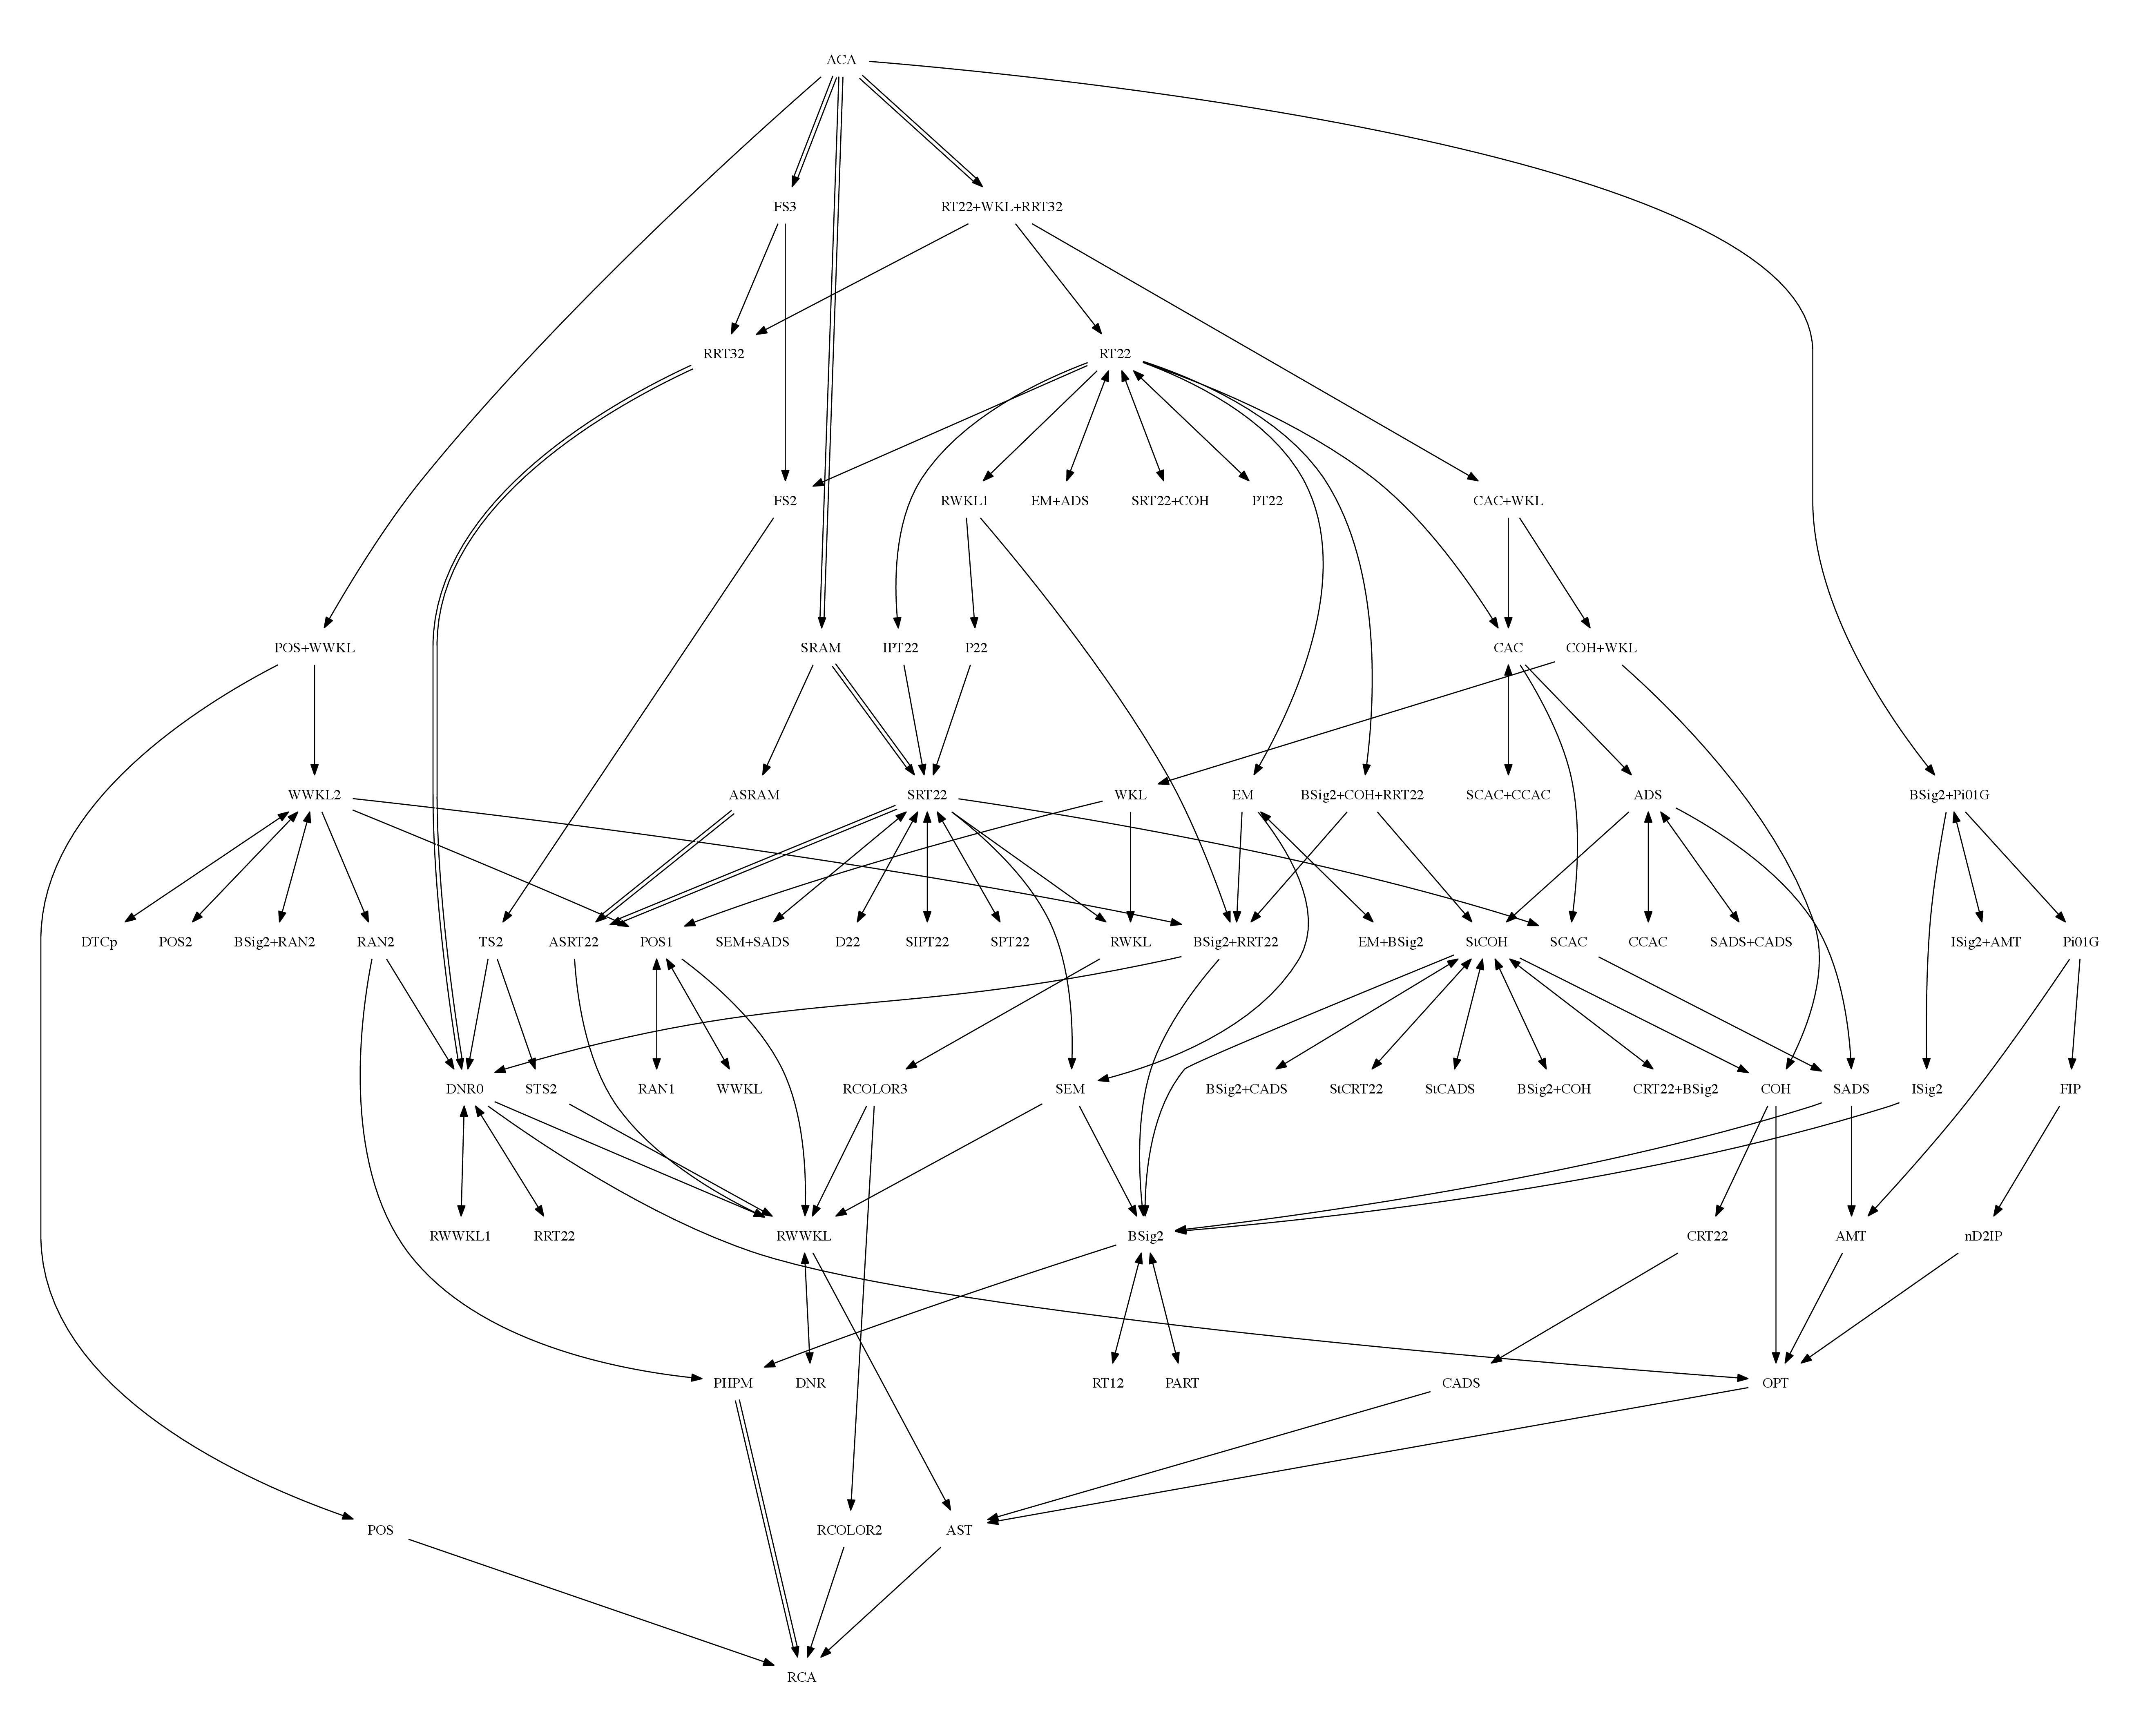 Relationships between mathematical problems, from the UConn Reverse Mathematics Zoo. (Courtesy of Damir Dzhafarov)